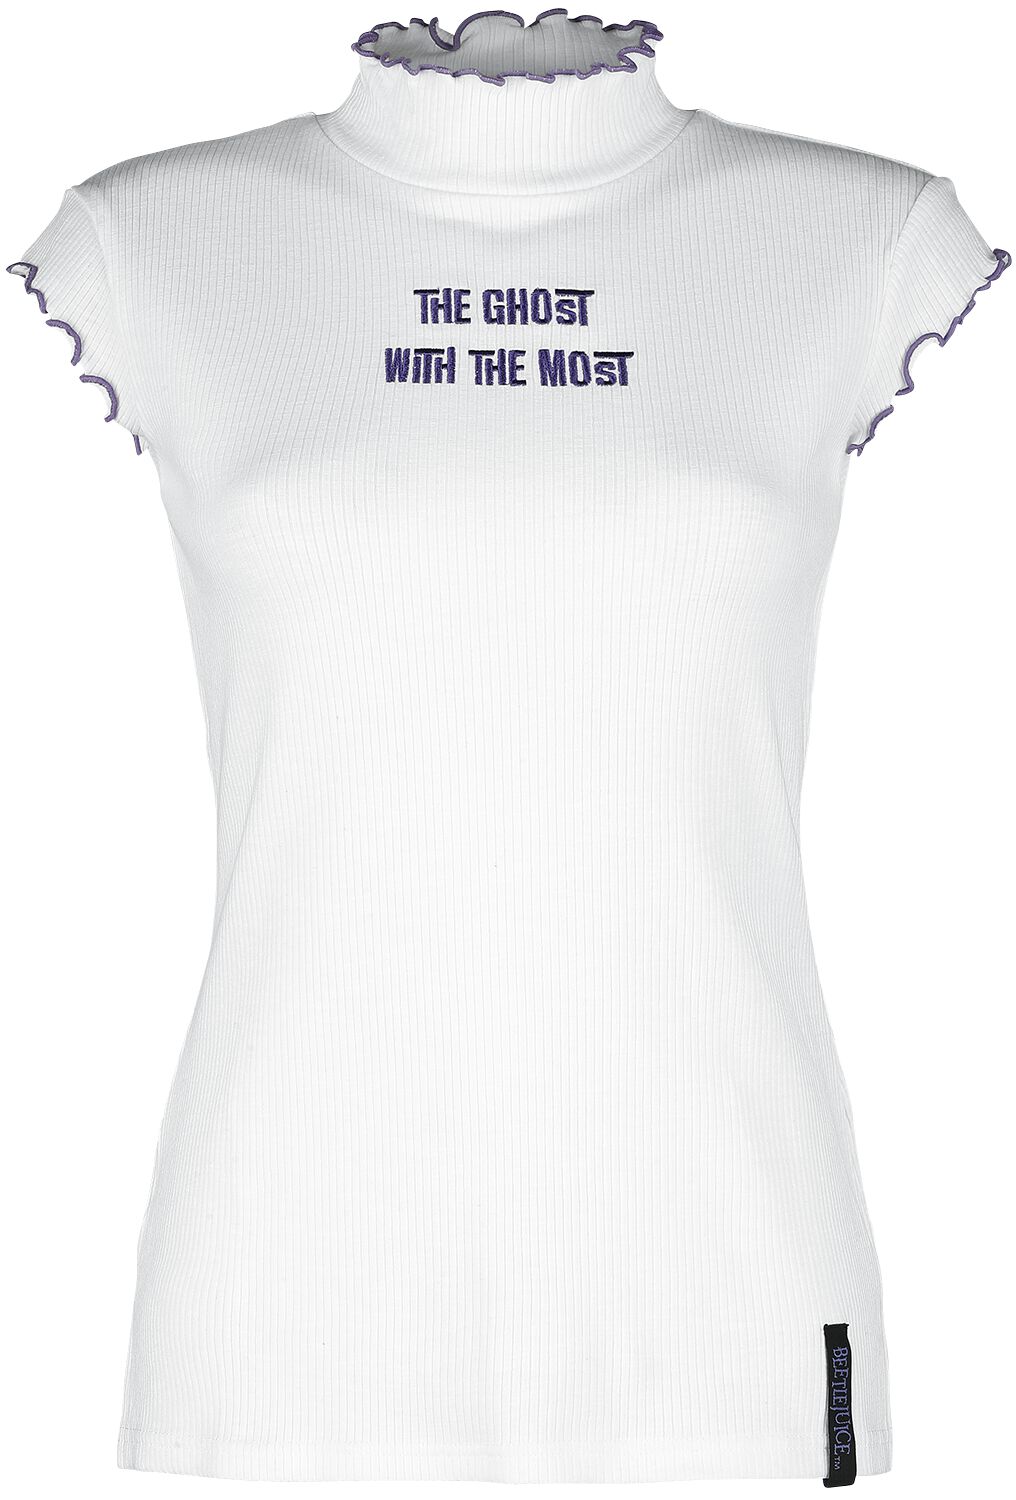 Image of T-Shirt di Beetlejuice - Ghost With The Most - XS a XXL - Donna - bianco